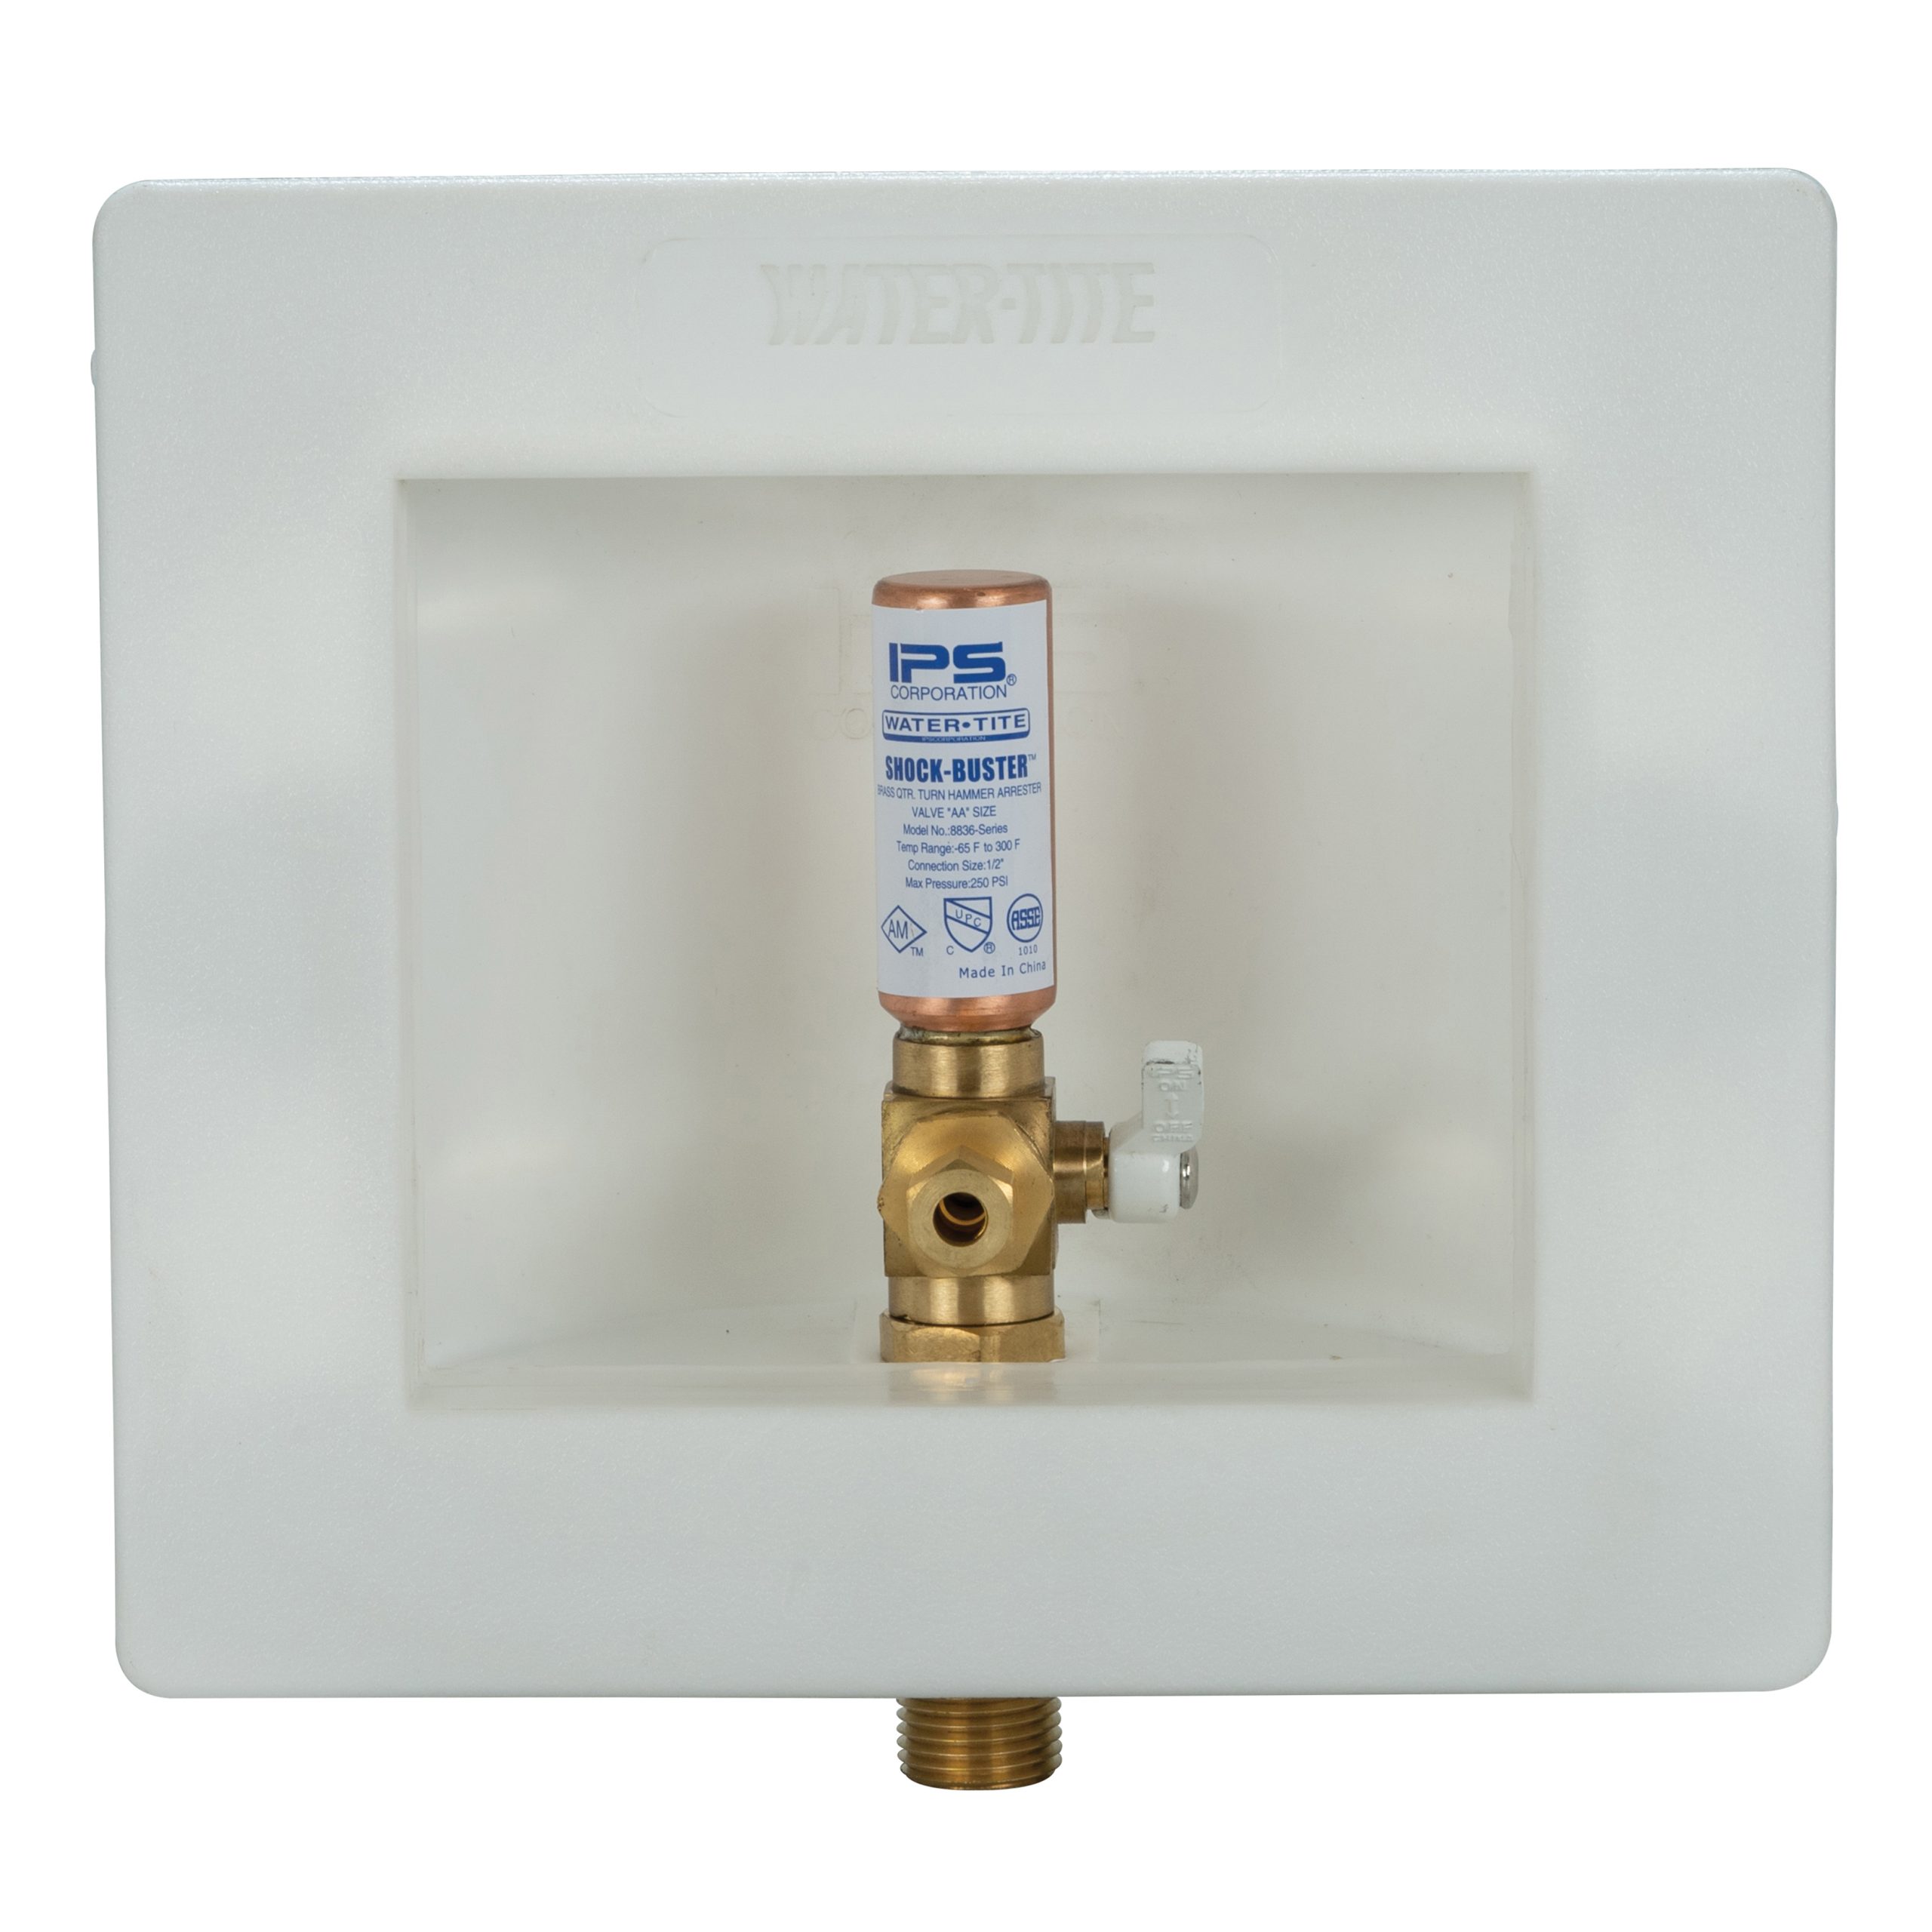 White 1/2 Wirsbo Connection IPS Corporation 1/2 Wirsbo Connection Brass Quarter-turn Valve Installed Water-Tite 88486 Round Lead-free Ice Maker Outlet Box with Hose 